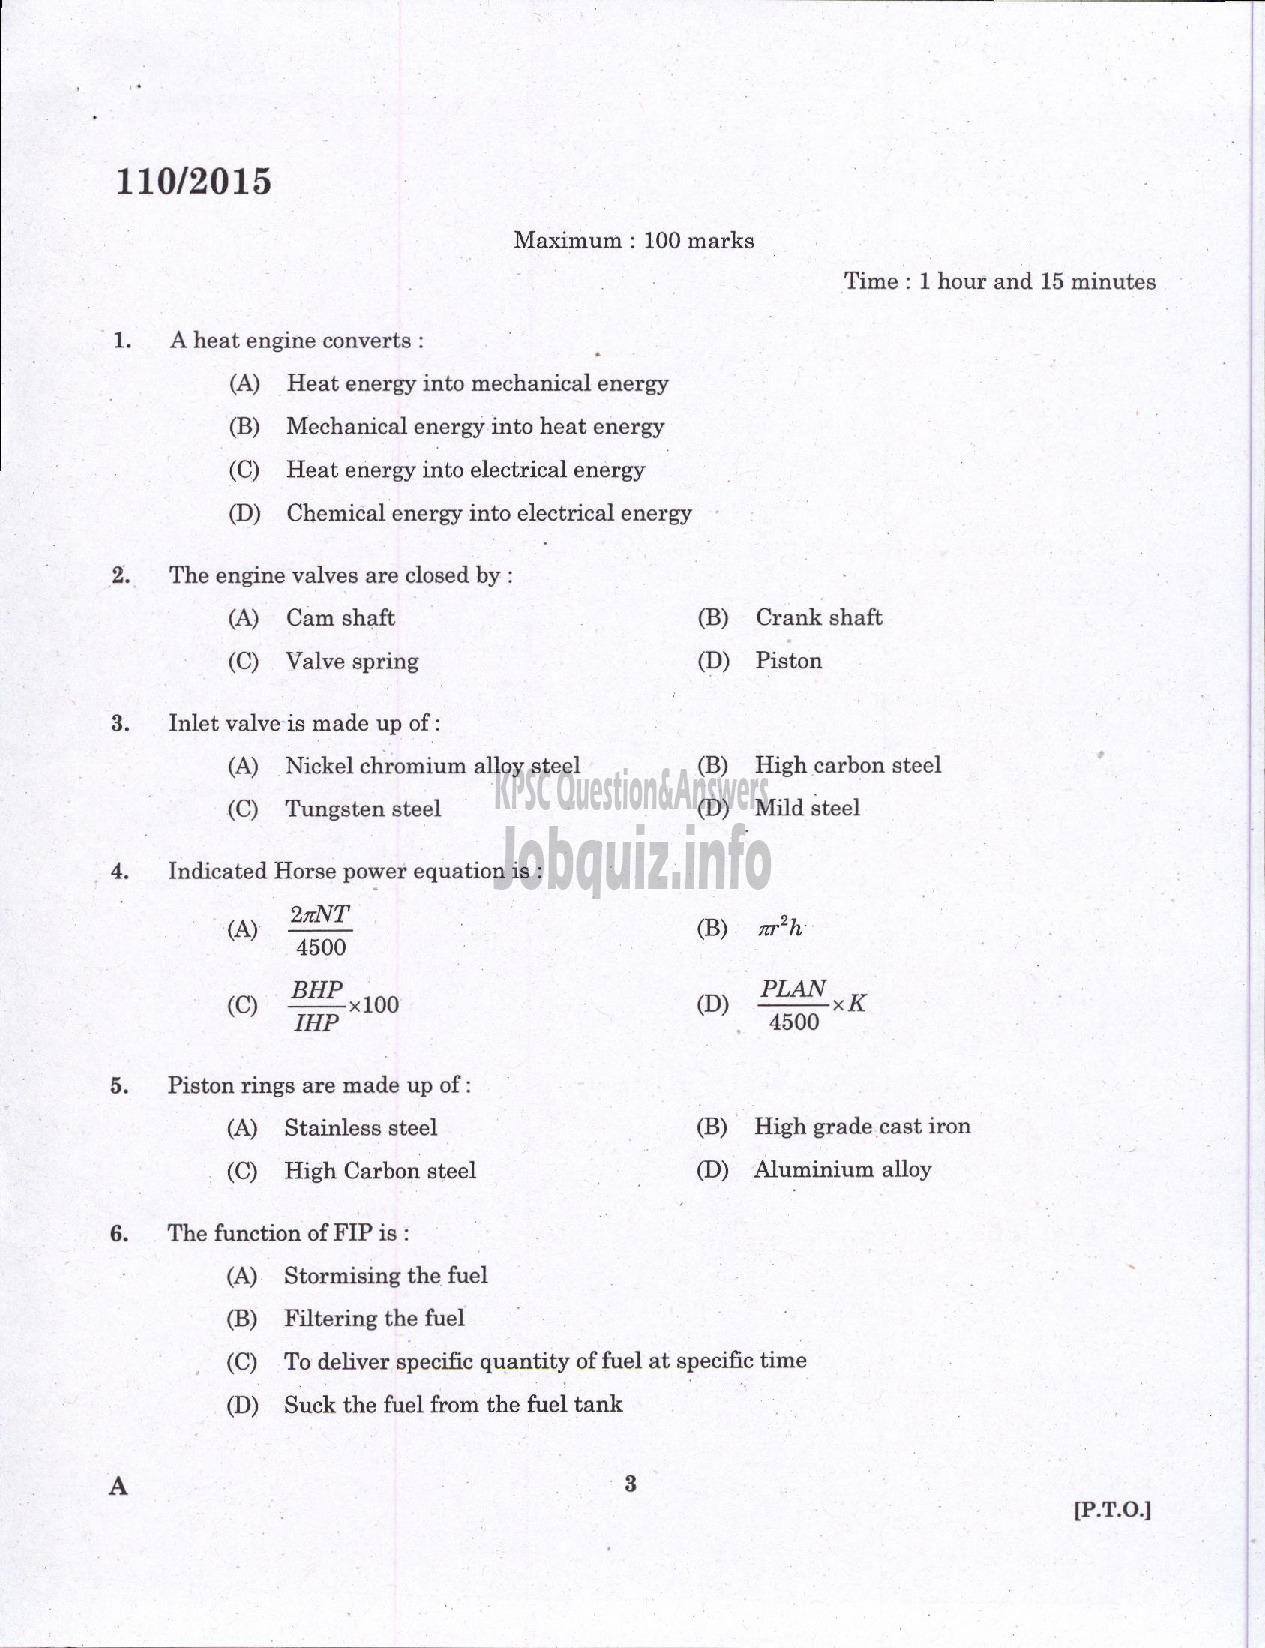 Kerala PSC Question Paper - PUMP OPERATOR GROUND WATER-1